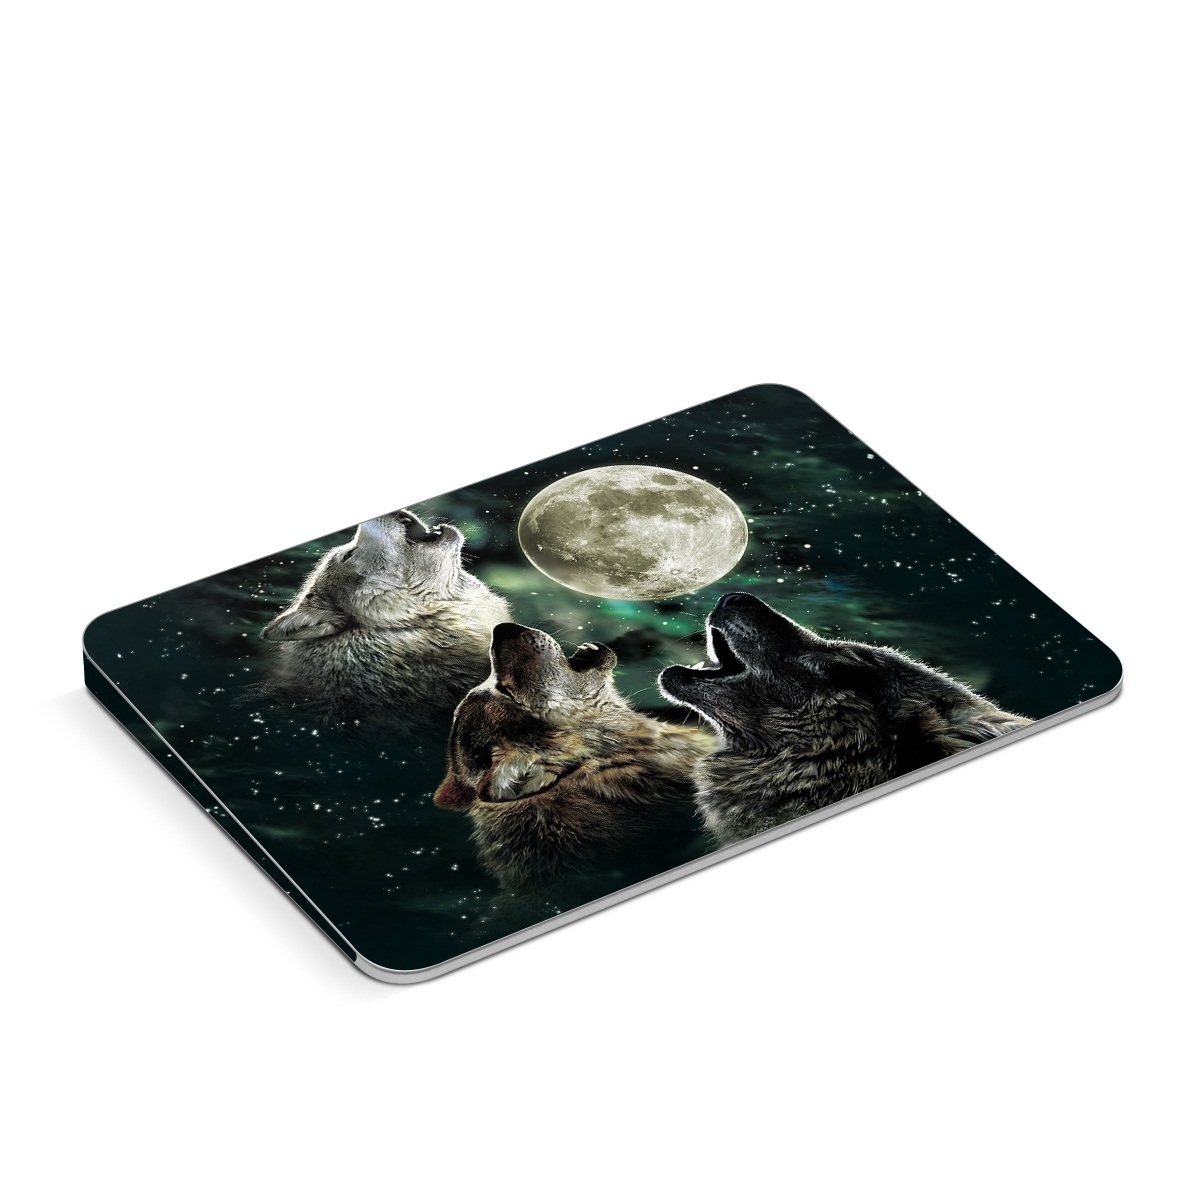 Apple Magic Trackpad Skin design of Wolf, Light, Astronomical object, Moon, Wildlife, Organism, Moonlight, Sky, Atmosphere, Celestial event, with black, gray, green colors